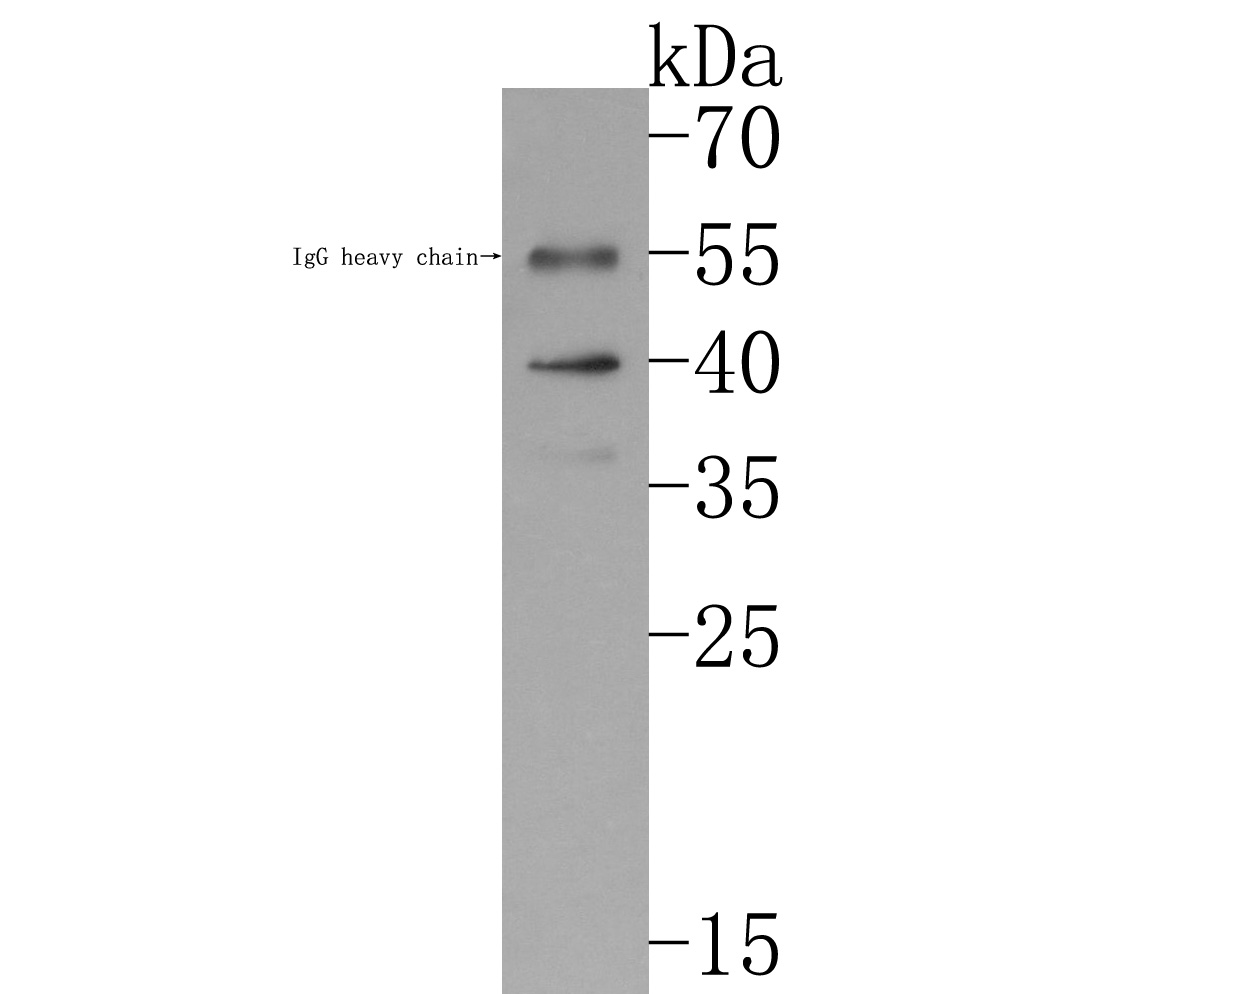 Western blot analysis of Biglycan on human skin tissue lysates. Proteins were transferred to a PVDF membrane and blocked with 5% BSA in PBS for 1 hour at room temperature. The primary antibody (ET7107-48, 1/500) was used in 5% BSA at room temperature for 2 hours. Goat Anti-Rabbit IgG - HRP Secondary Antibody (HA1001) at 1:200,000 dilution was used for 1 hour at room temperature.